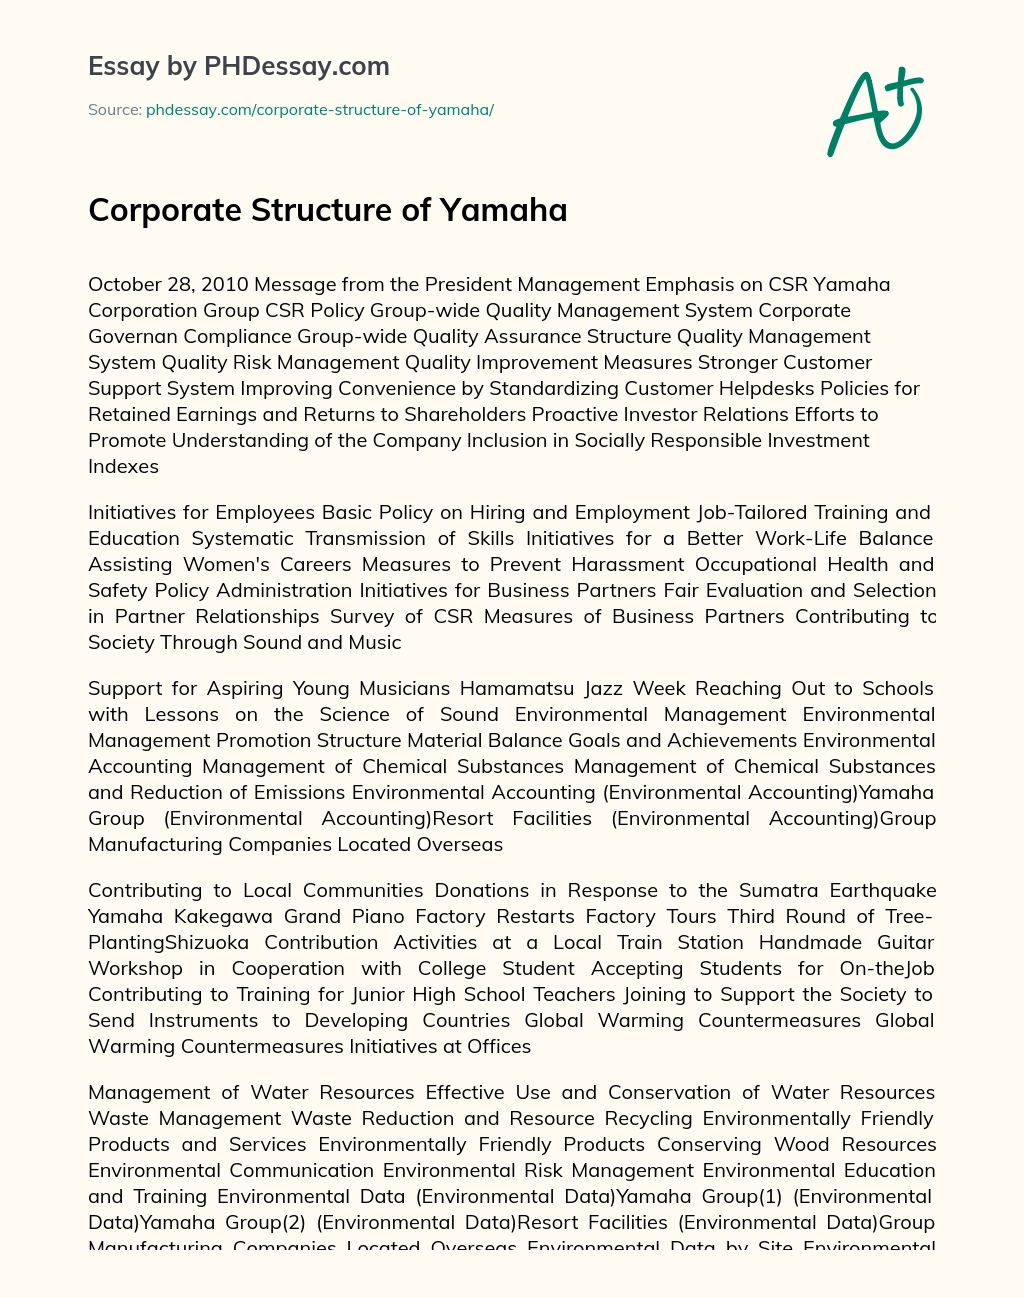 Corporate Structure of Yamaha essay